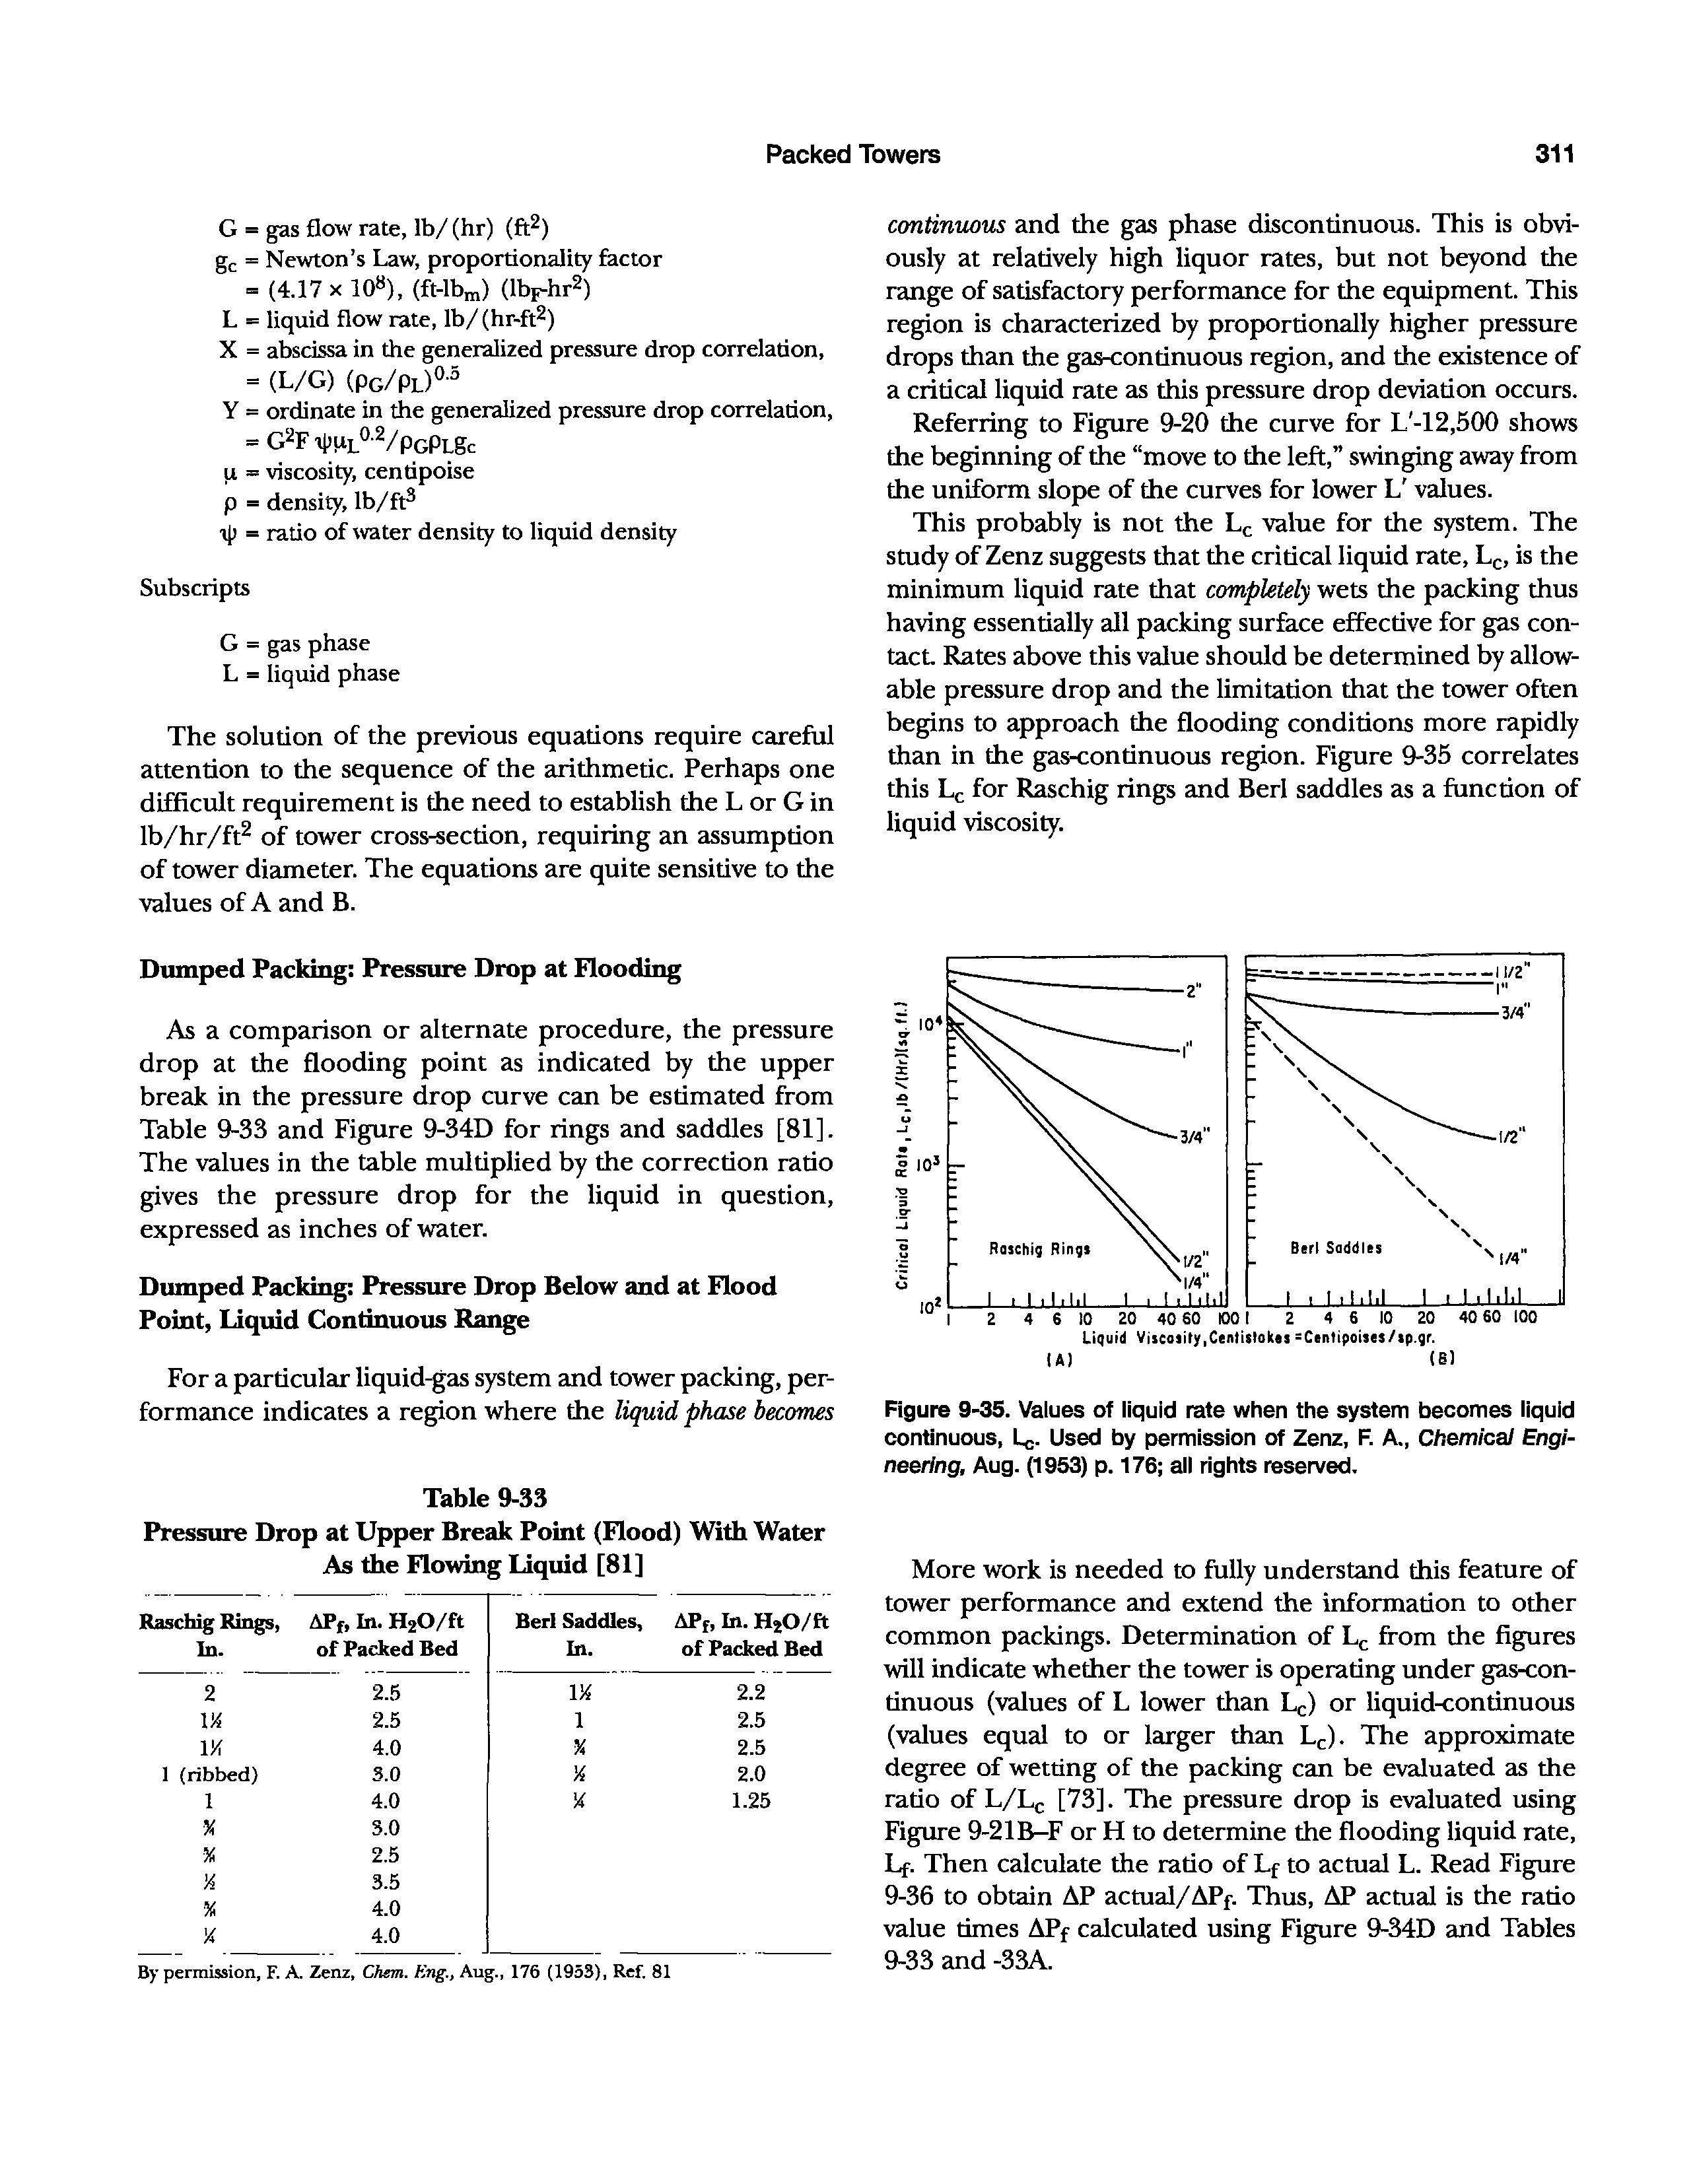 Figure 9-35. Values of liquid rate when the system becomes liquid continuous, Lc- Used by permission of Zenz, F. A., Chemical Engineering, Aug. (1953) p. 176 all rights reserved.